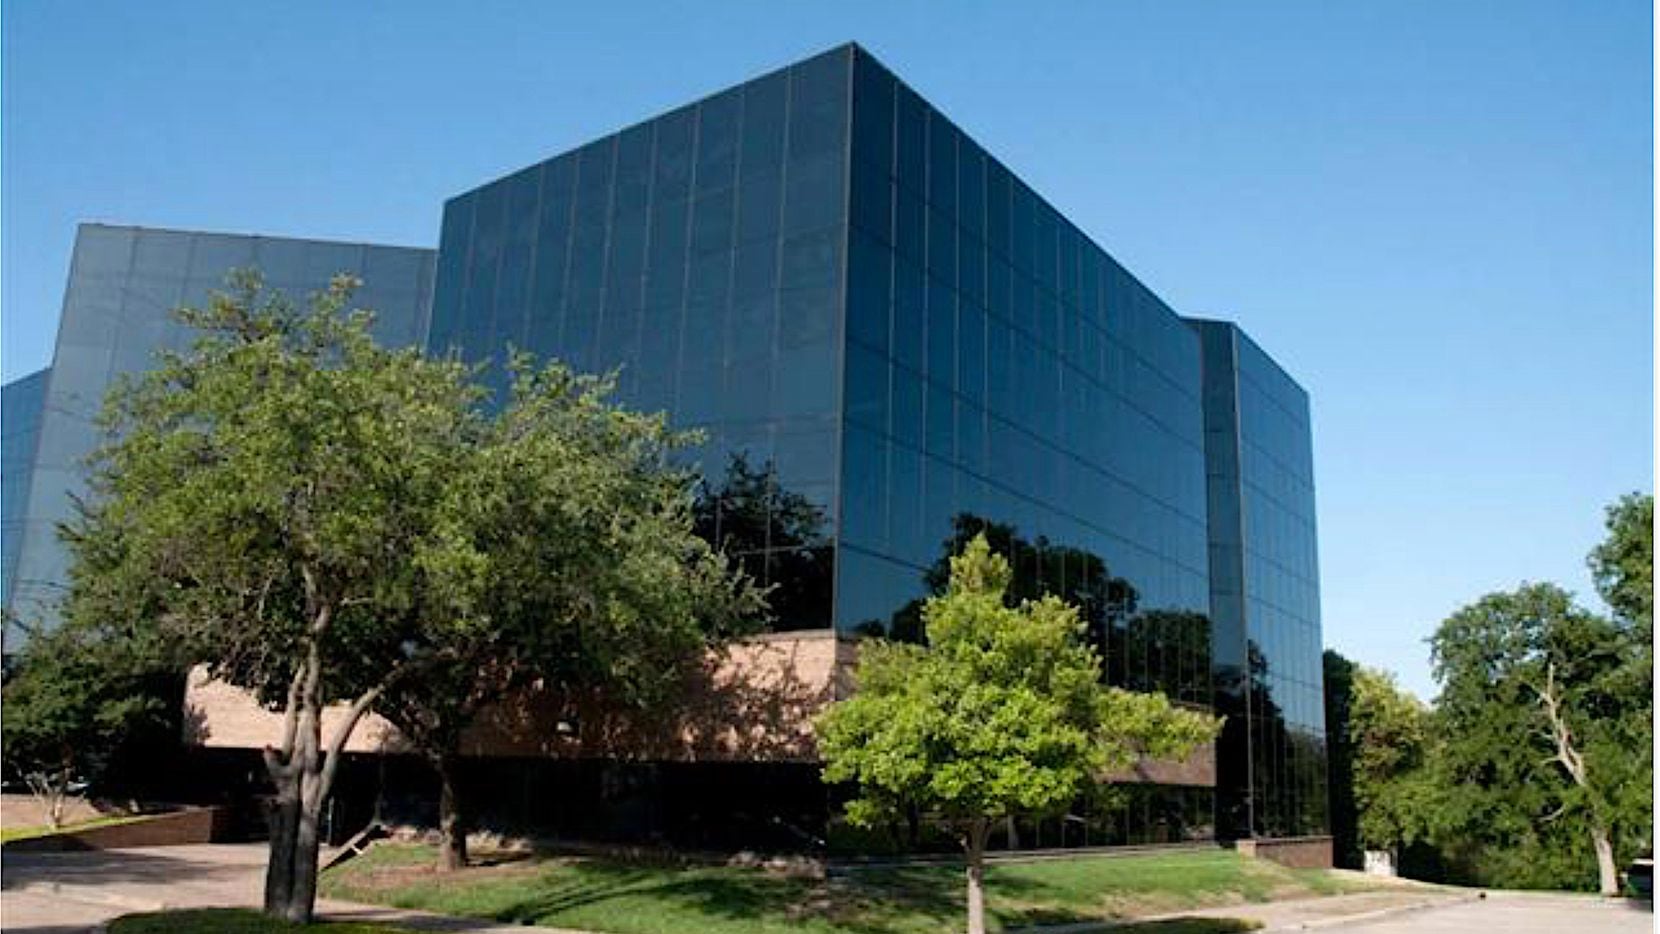 One of the buildings in the sale was the Chisholm Place office in Plano.